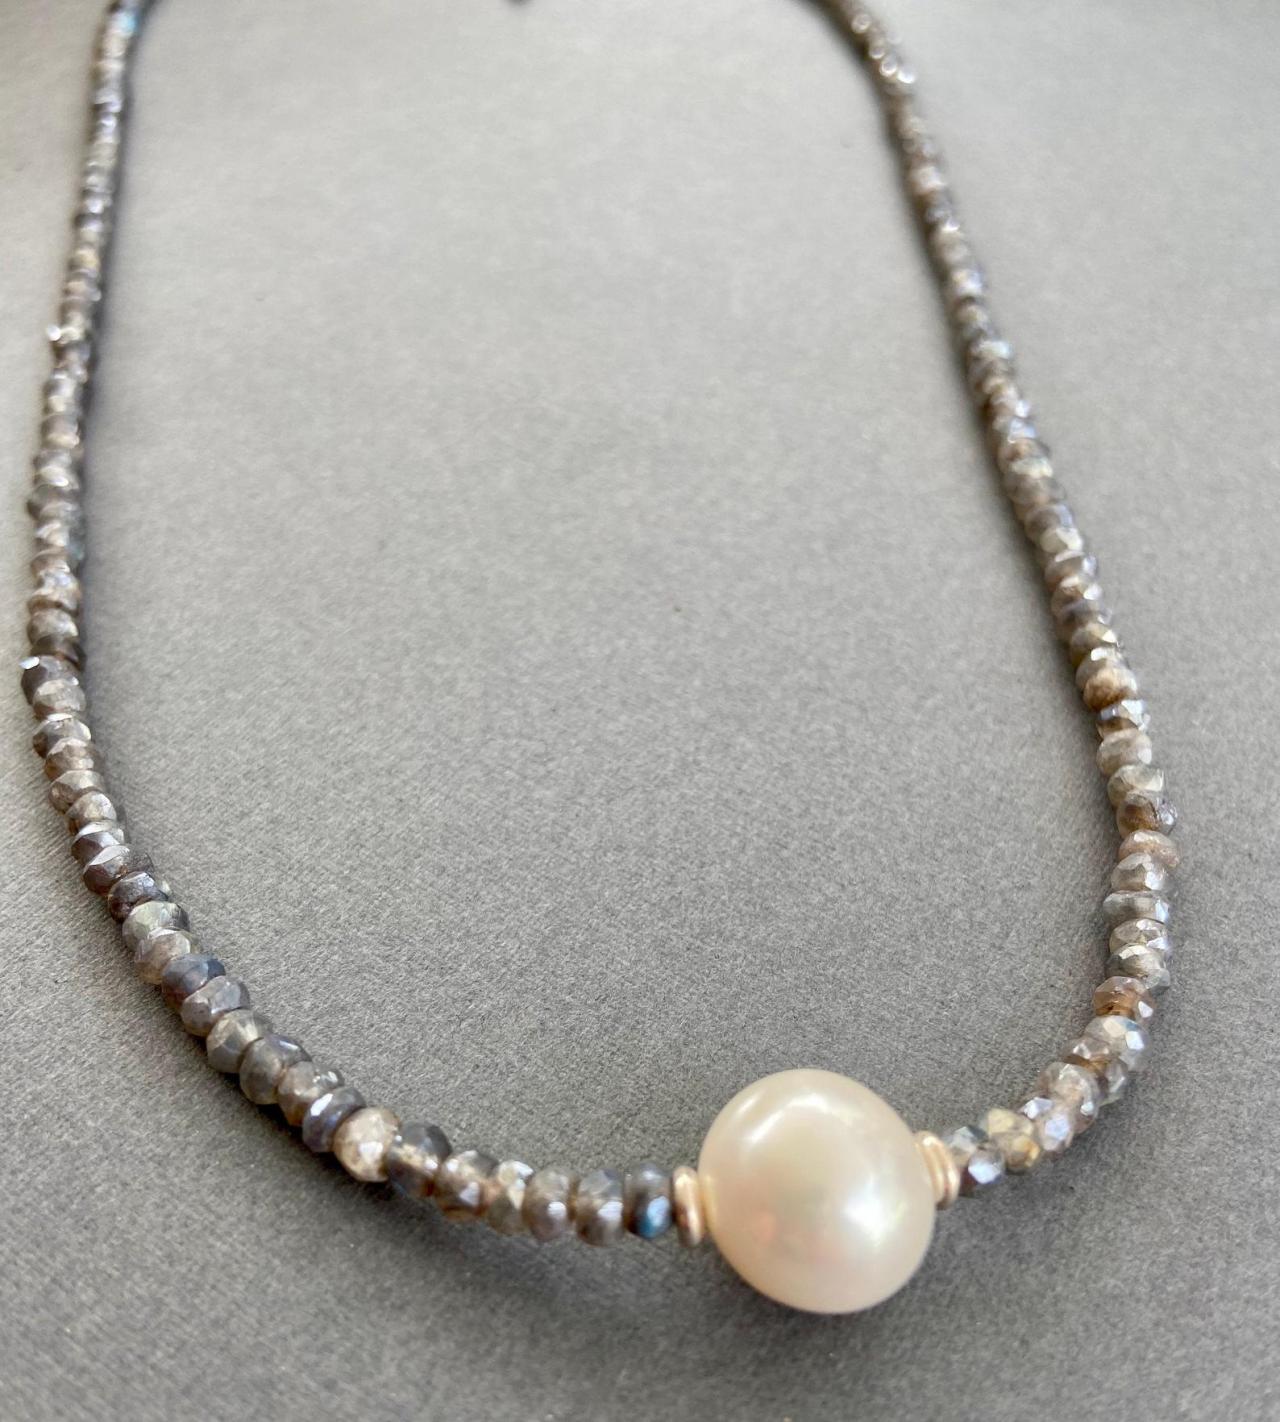 Large Freshwater Pearl Faceted Gray Moonstone Labradorite Minimalist Necklace Adjustable